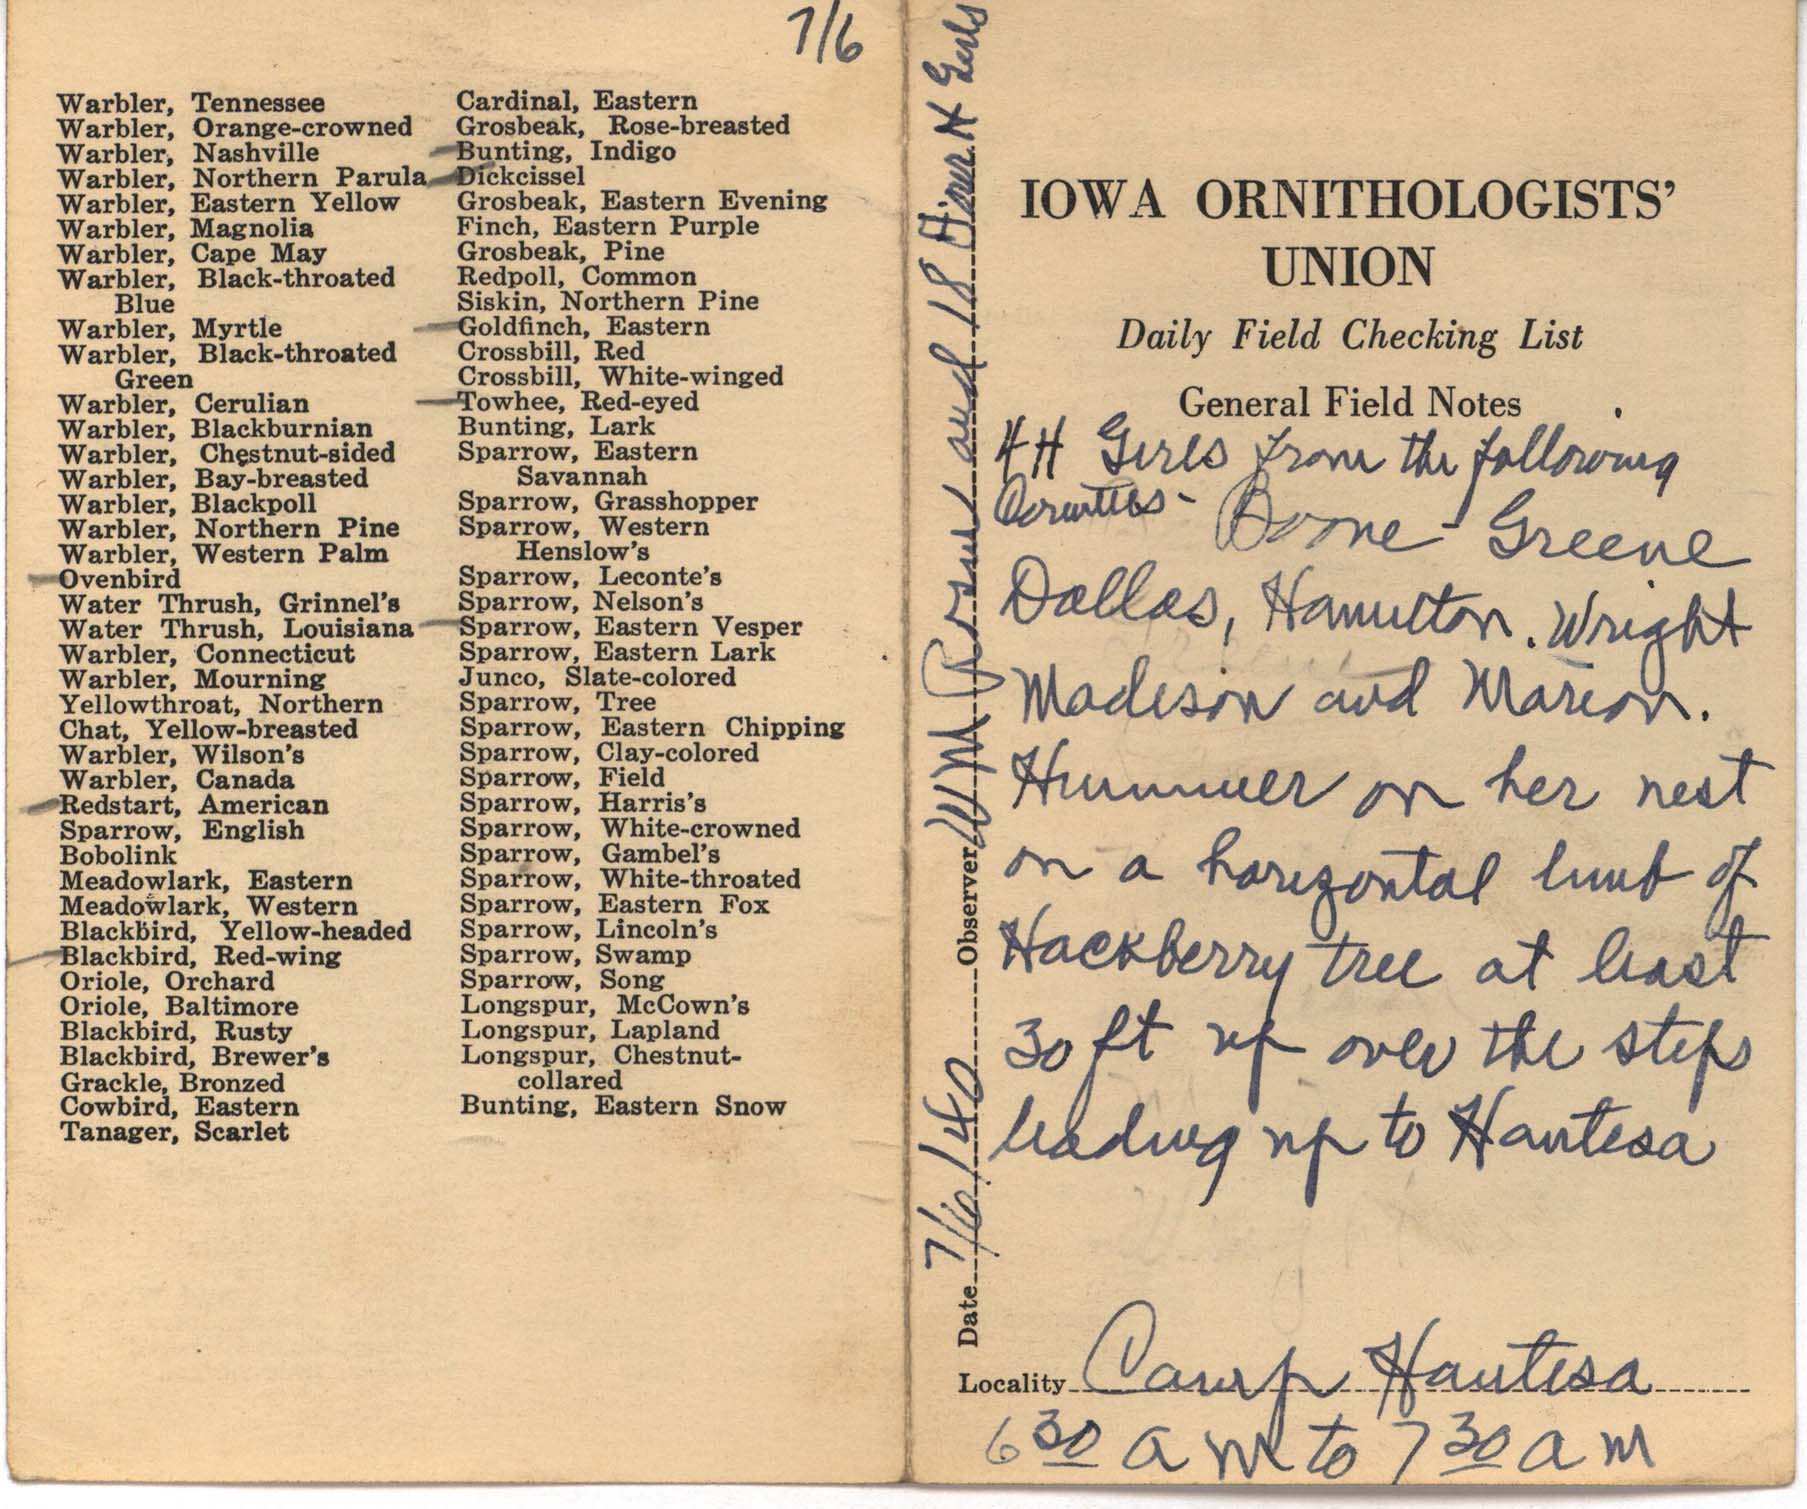 Daily field checking list by Walter Rosene, July 6, 1940